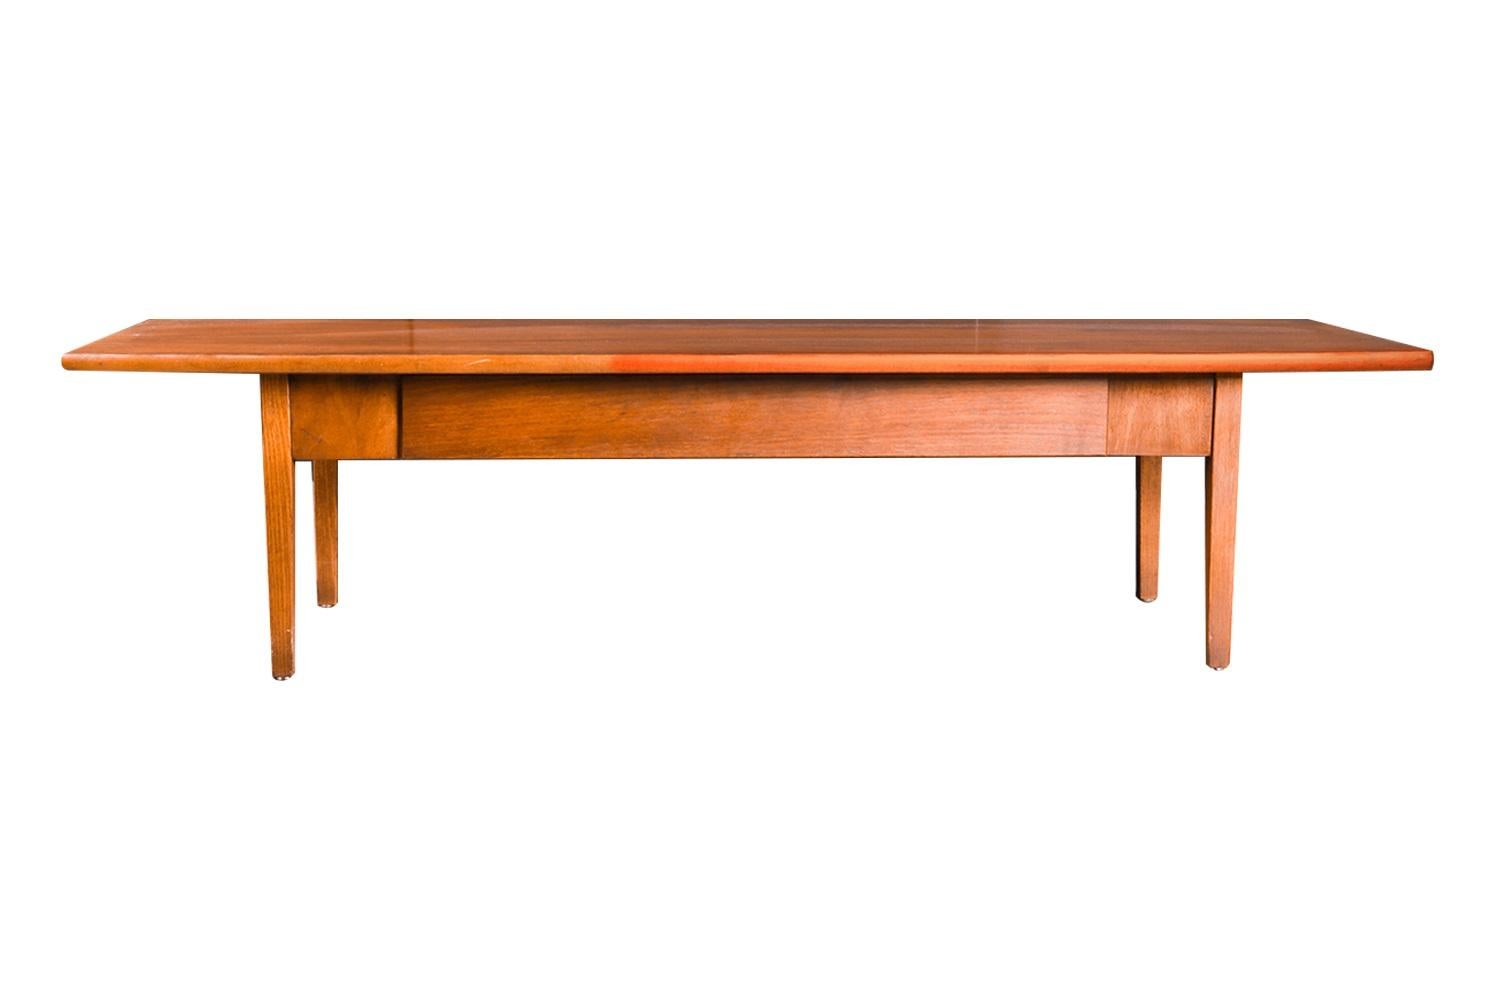 A beautiful, mid-century, modern, 1960’s, Danish style, coffee table/ bench, by Stanley Furniture. The perfect length to pair with an extra long sofa, in great original condition. Featuring rectangular top, with Scandinavian influence, made of rich